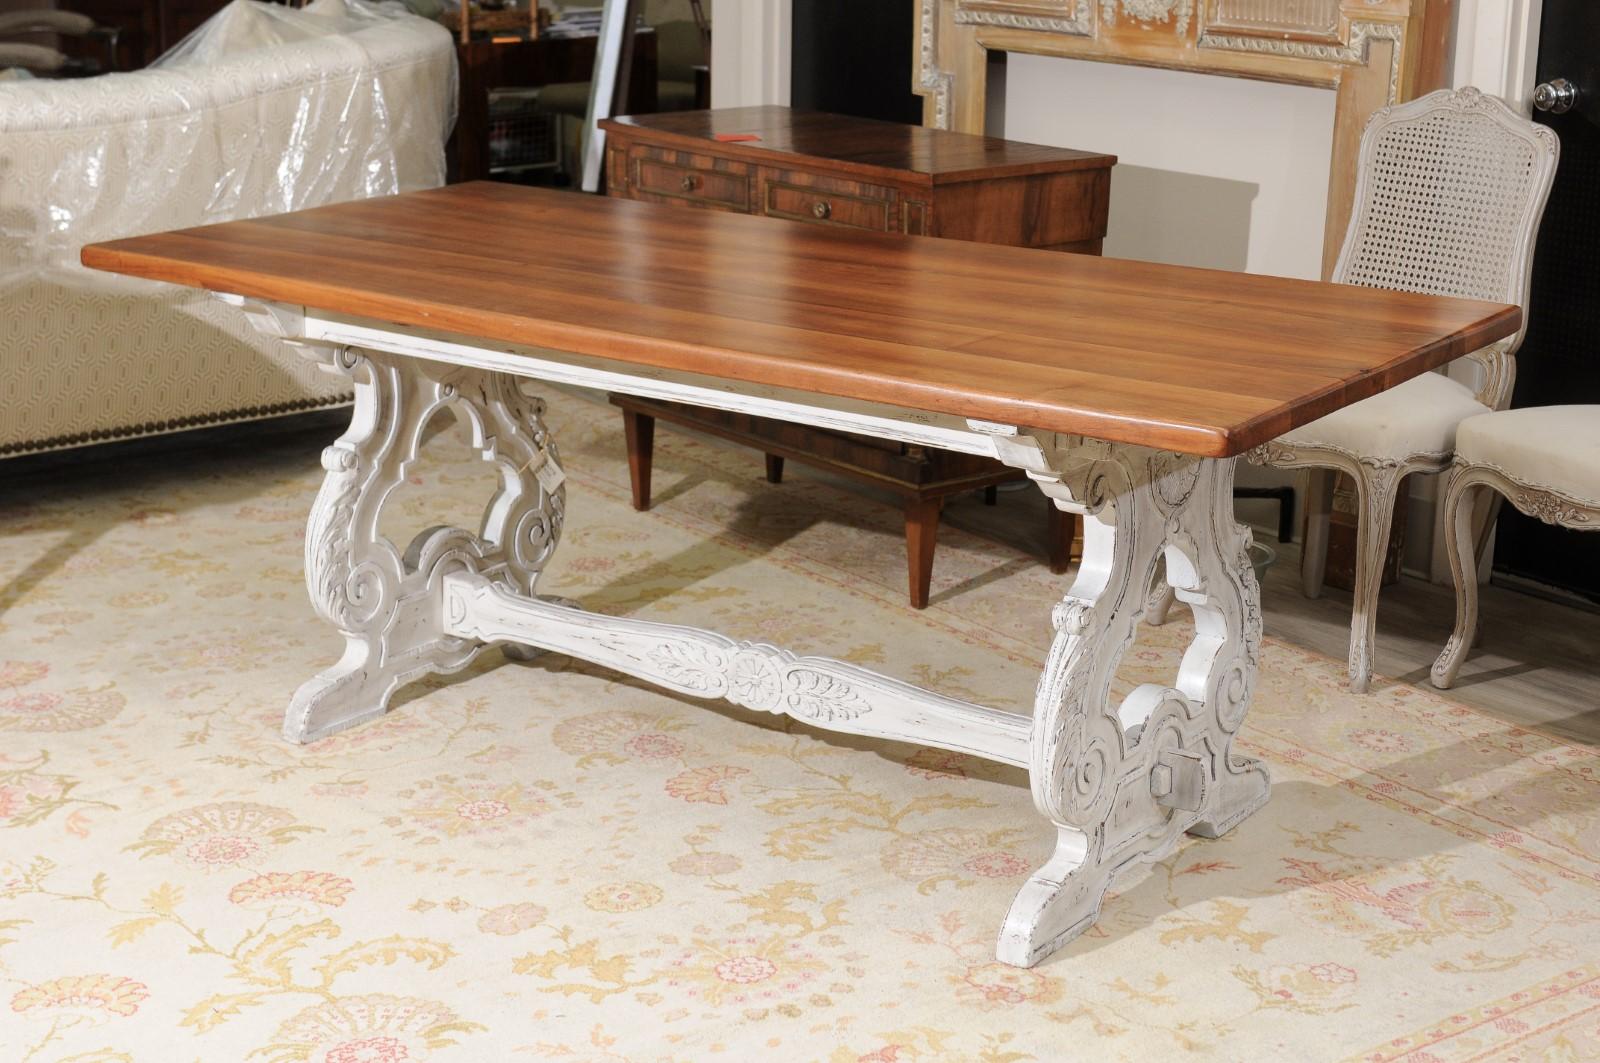 A rectangular sturdy solid cherry top sits on top of a beautifully carved painted base with an ornate stretcher. It would be perfect if used as a sofa table, dining table or library table.